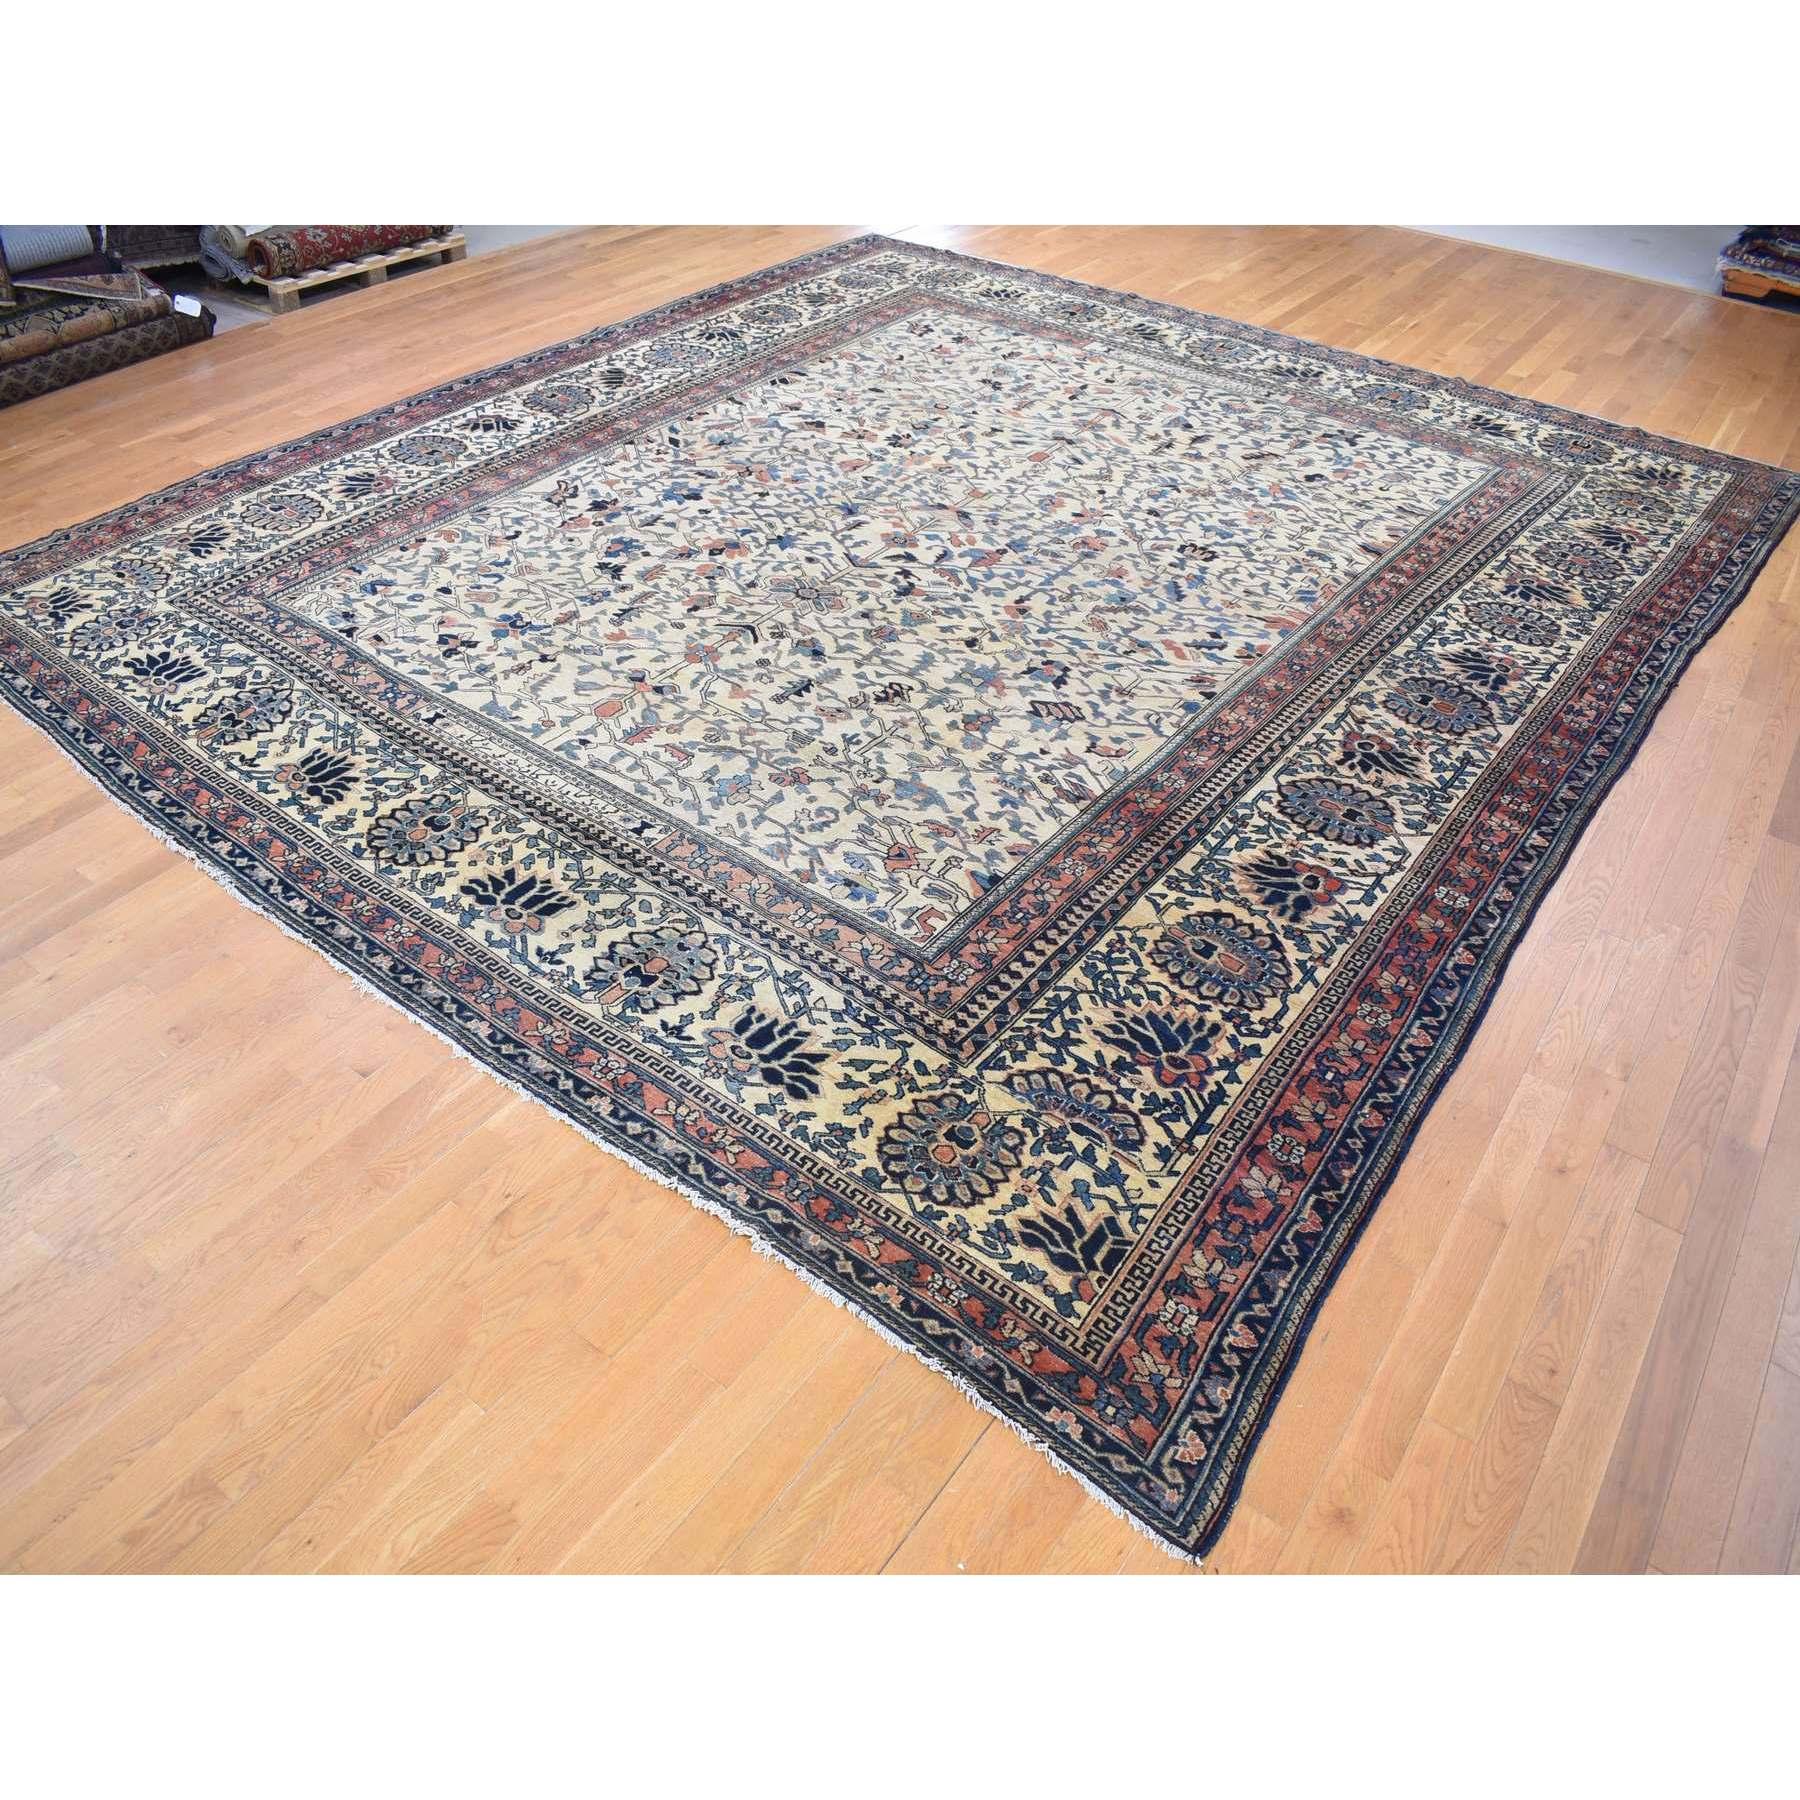 This fabulous hand-knotted carpet has been created and designed for extra strength and durability. This rug has been handcrafted for weeks in the traditional method that is used to make
Exact Rug Size in Feet and Inches : 14'3